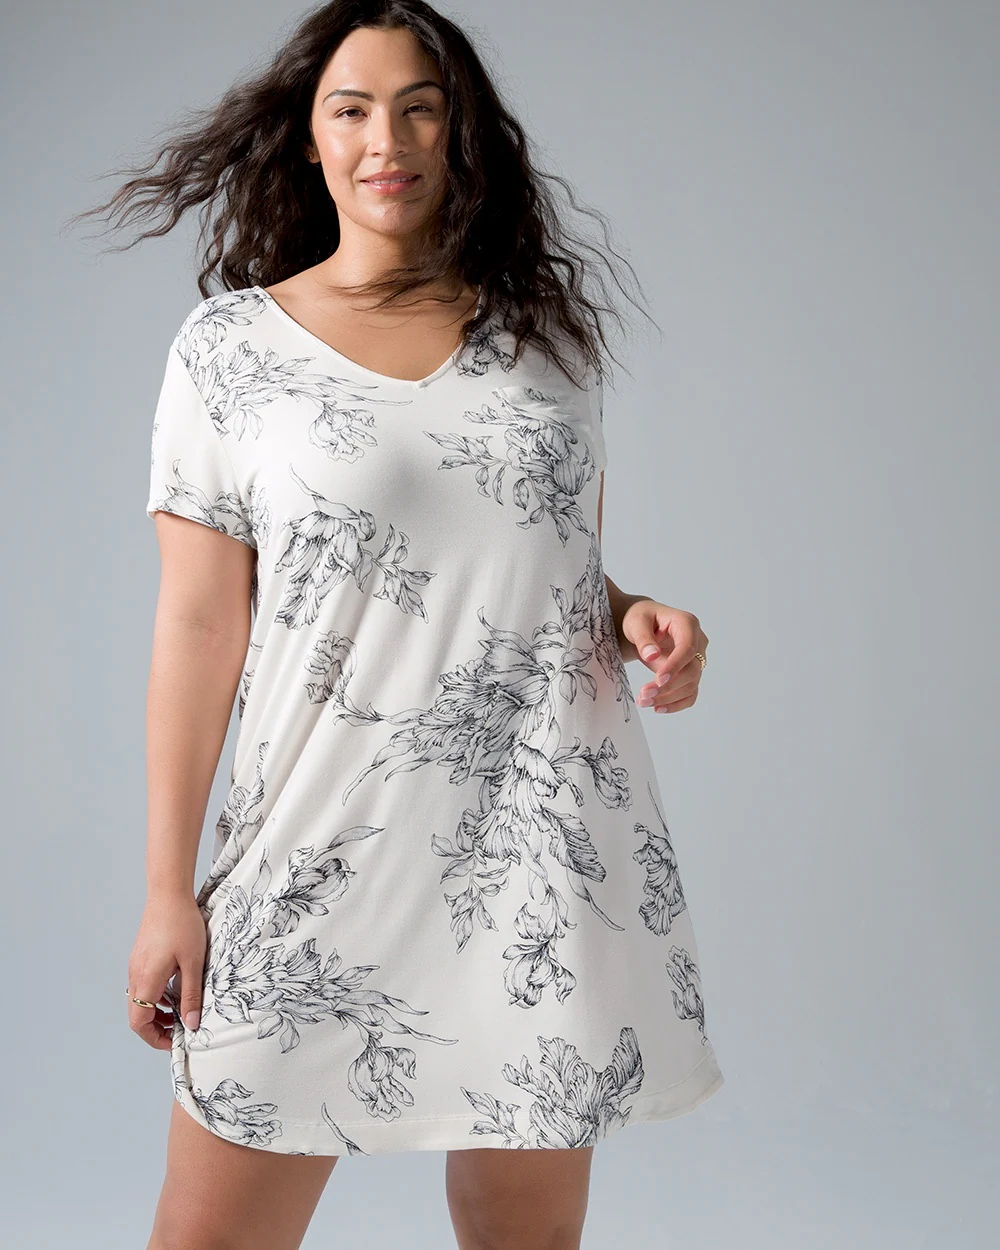 Soma<sup class=st-superscript>®</sup> women's model wearing a white and black floral short-sleeve sleep shirt.